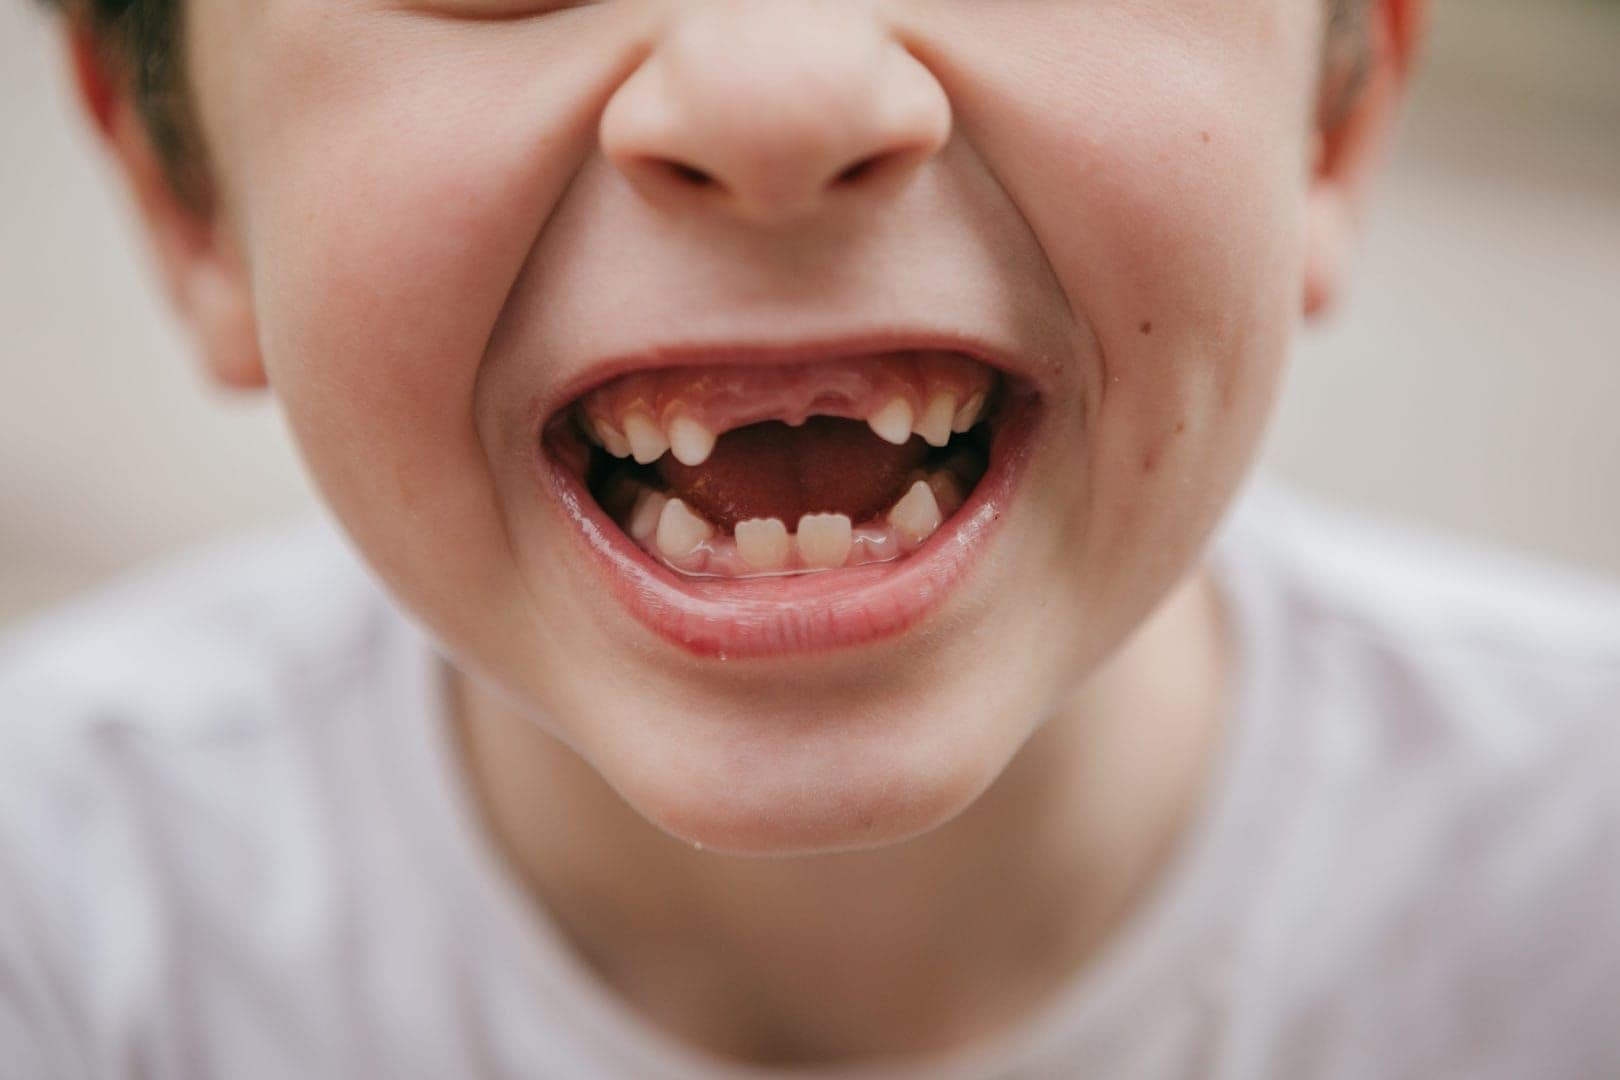 Losing baby teeth: When do they fall out and in what order?